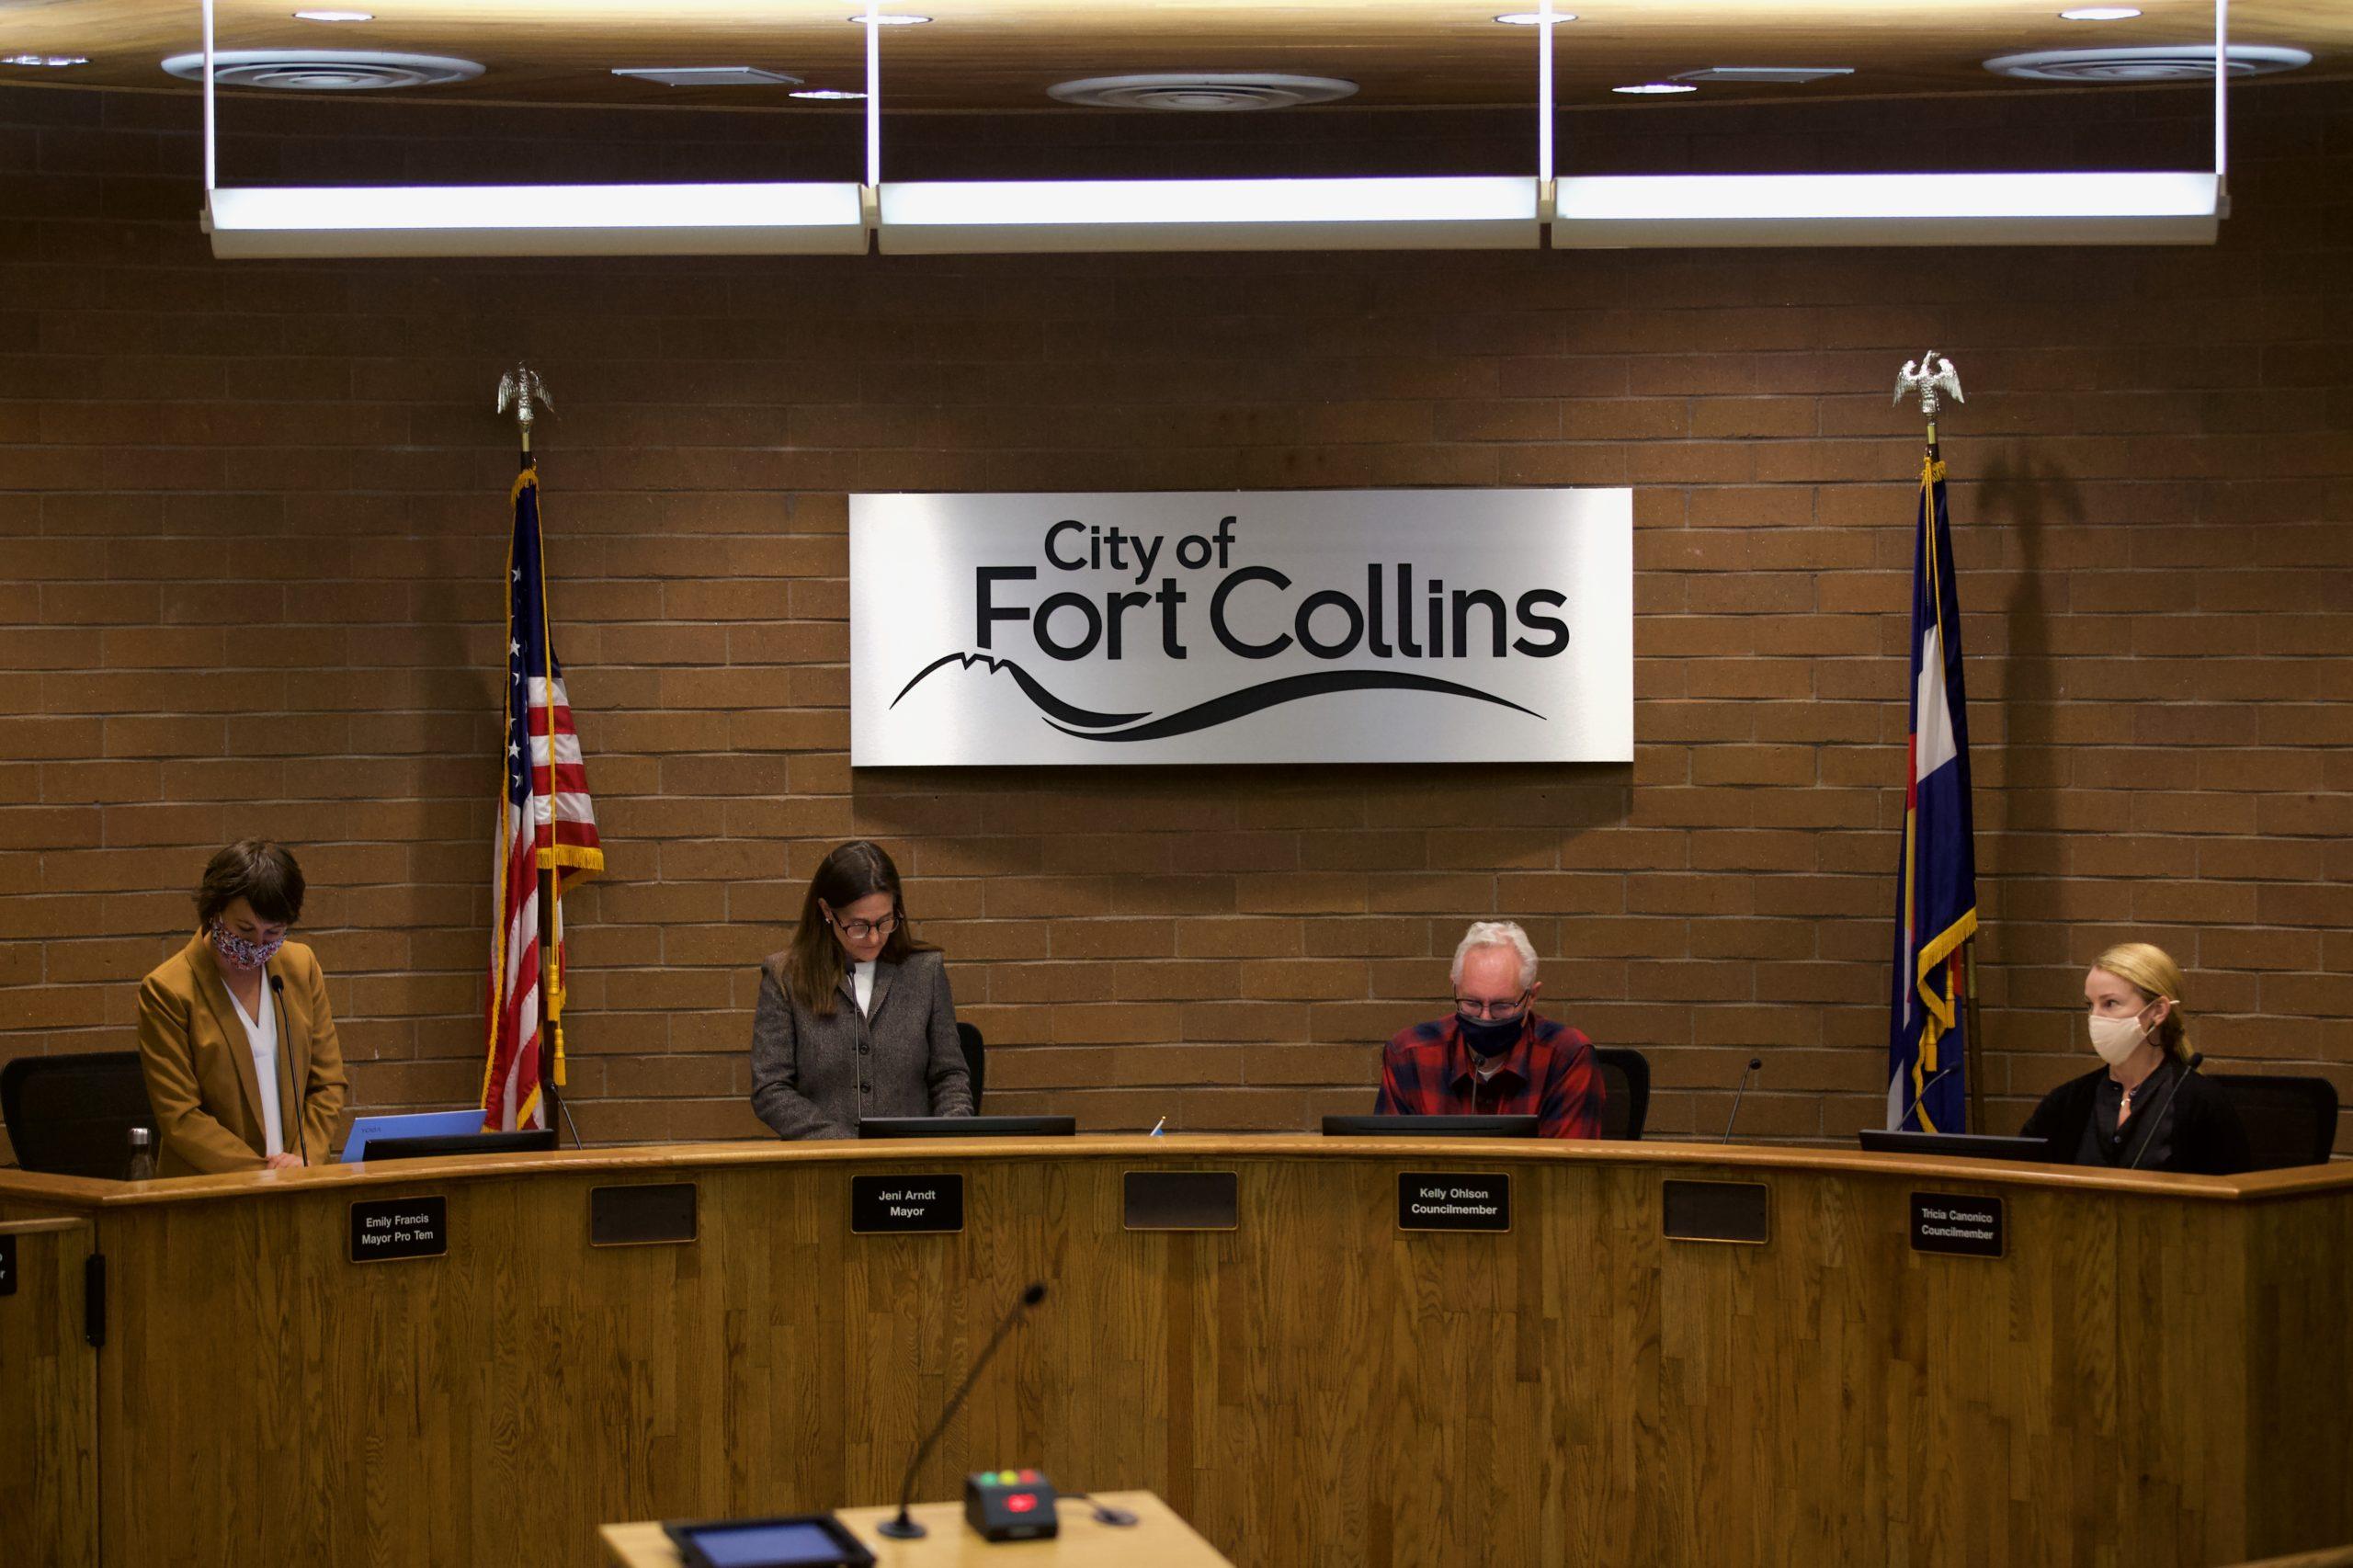 Fort Collins City Council in session Sept. 21. The City Council heard from community members and moved forward with a variety of ordinances impacting Poudre School District, local marijuana codes, infrastructure, and other aspects of the city. (Ryan Schmidt | The Collegian)